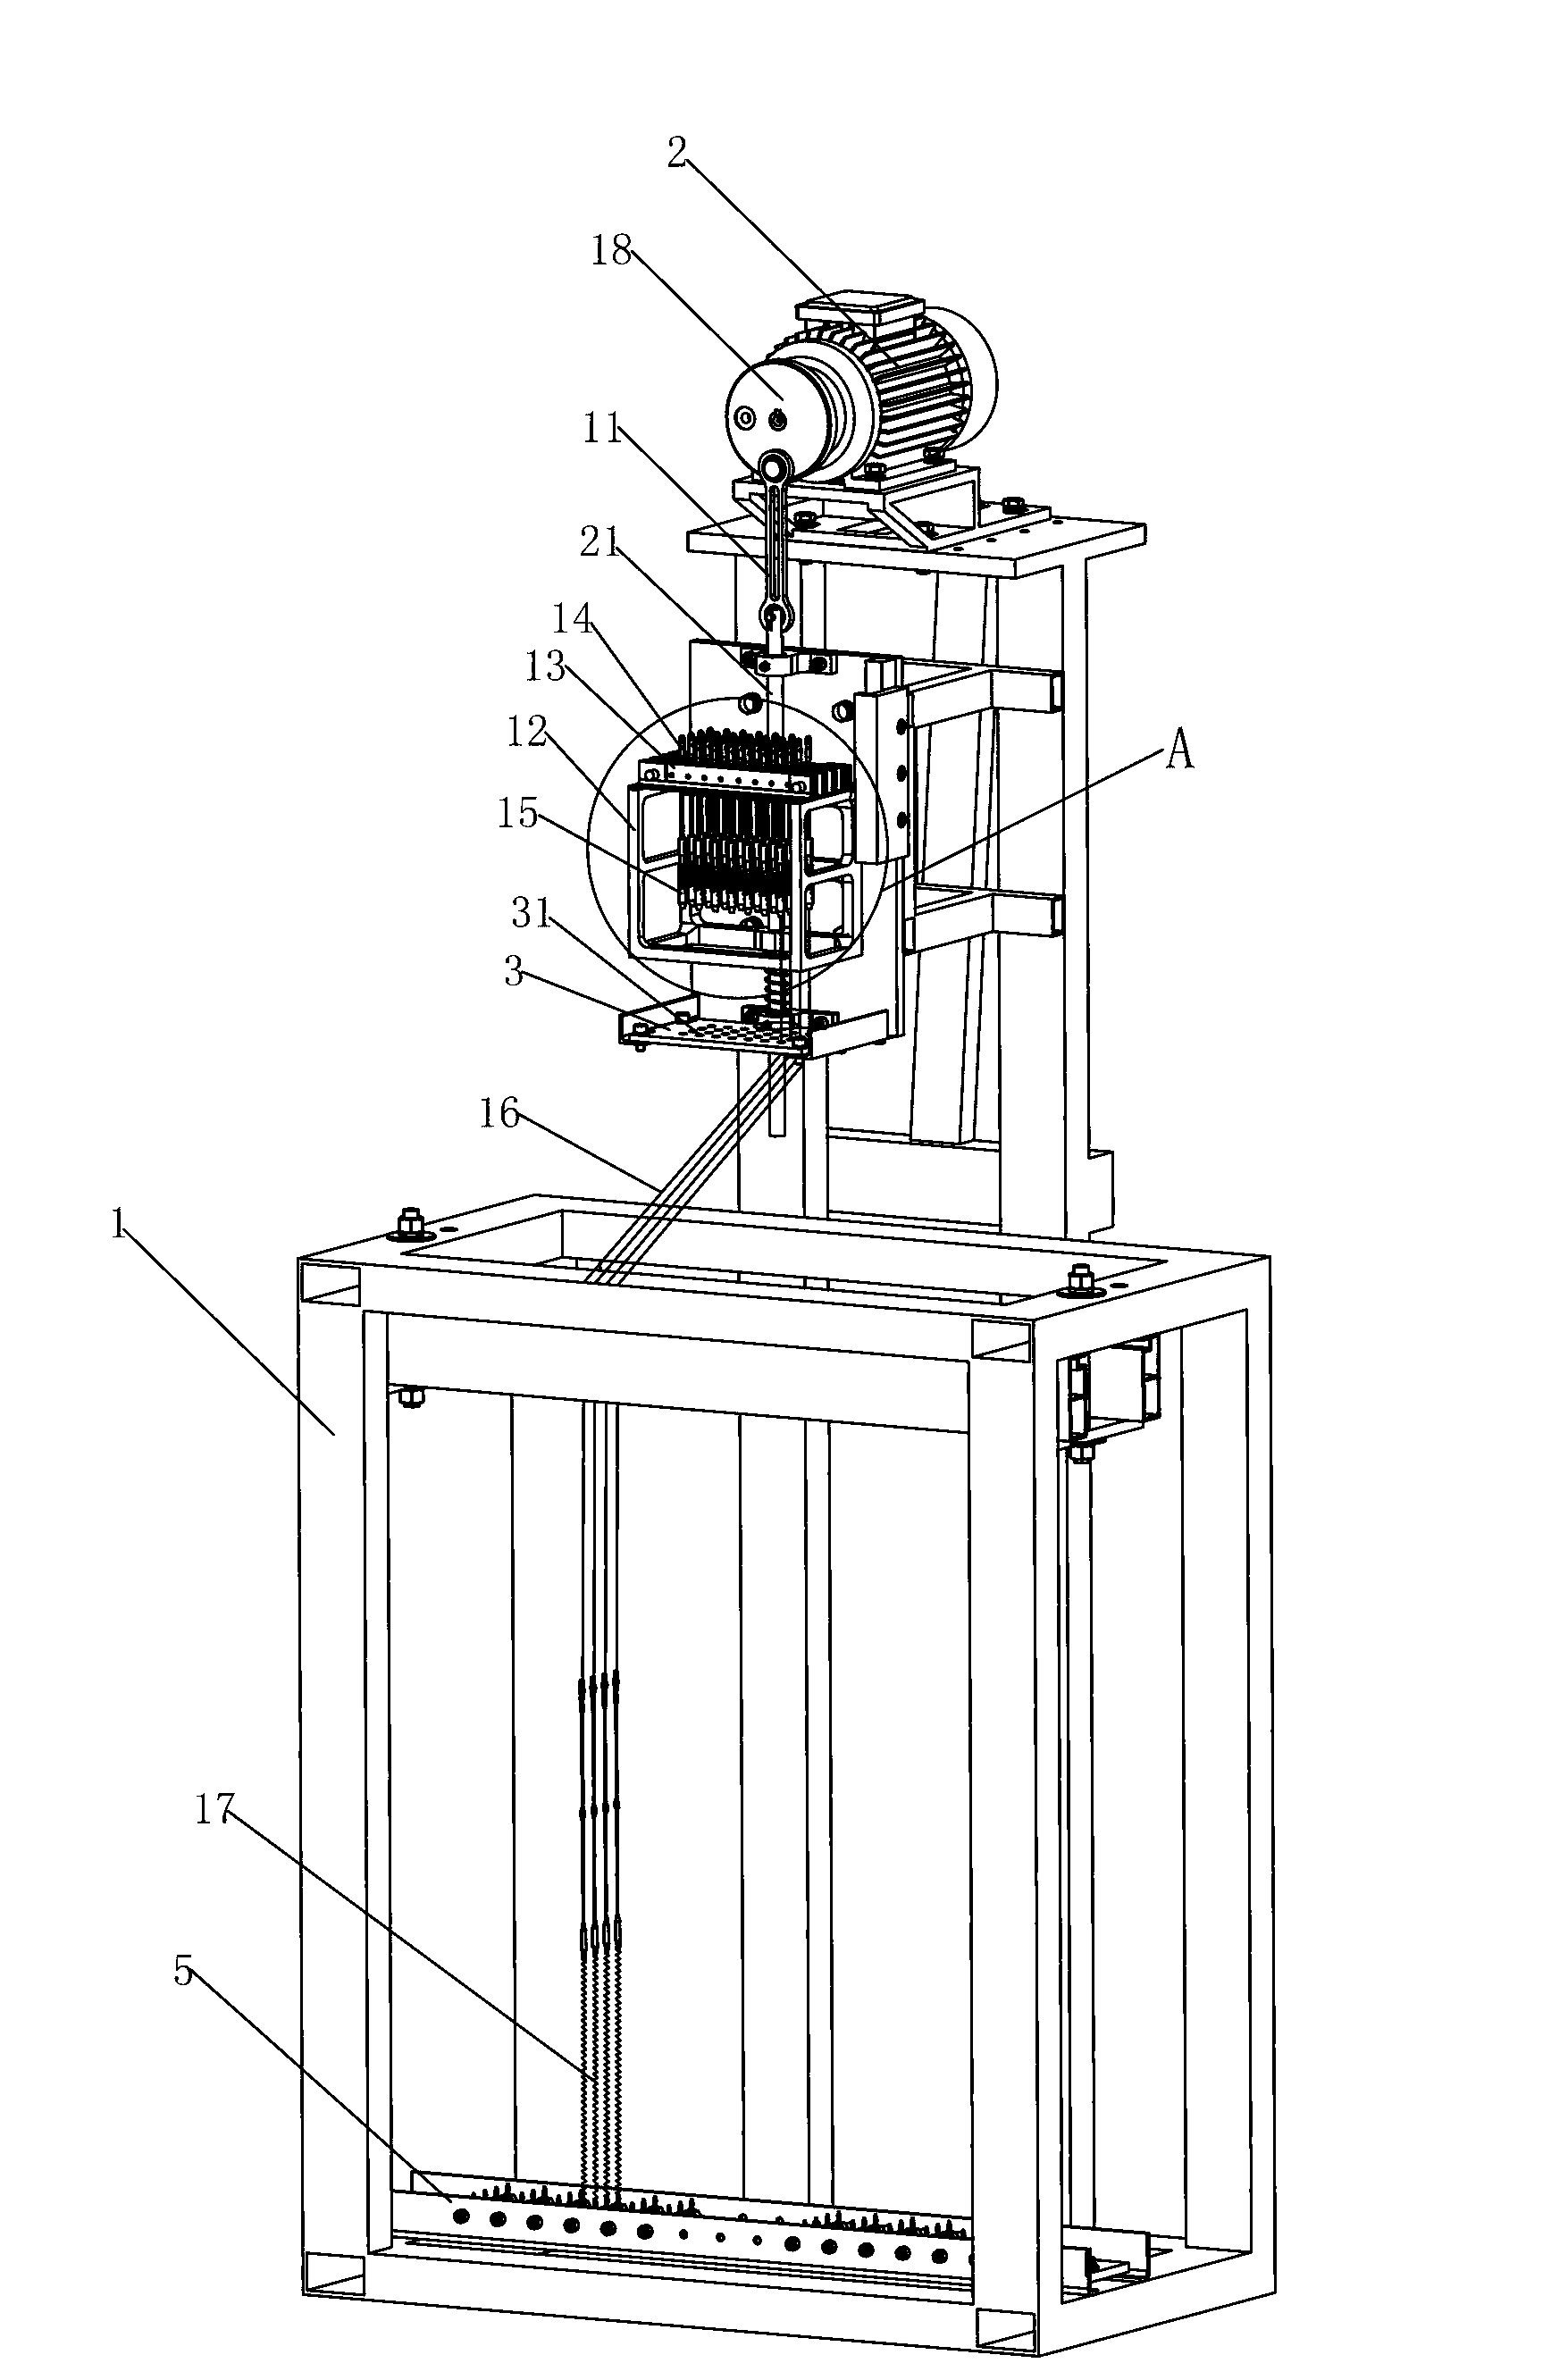 Harness string mounting apparatus and high-speed spring test equipment